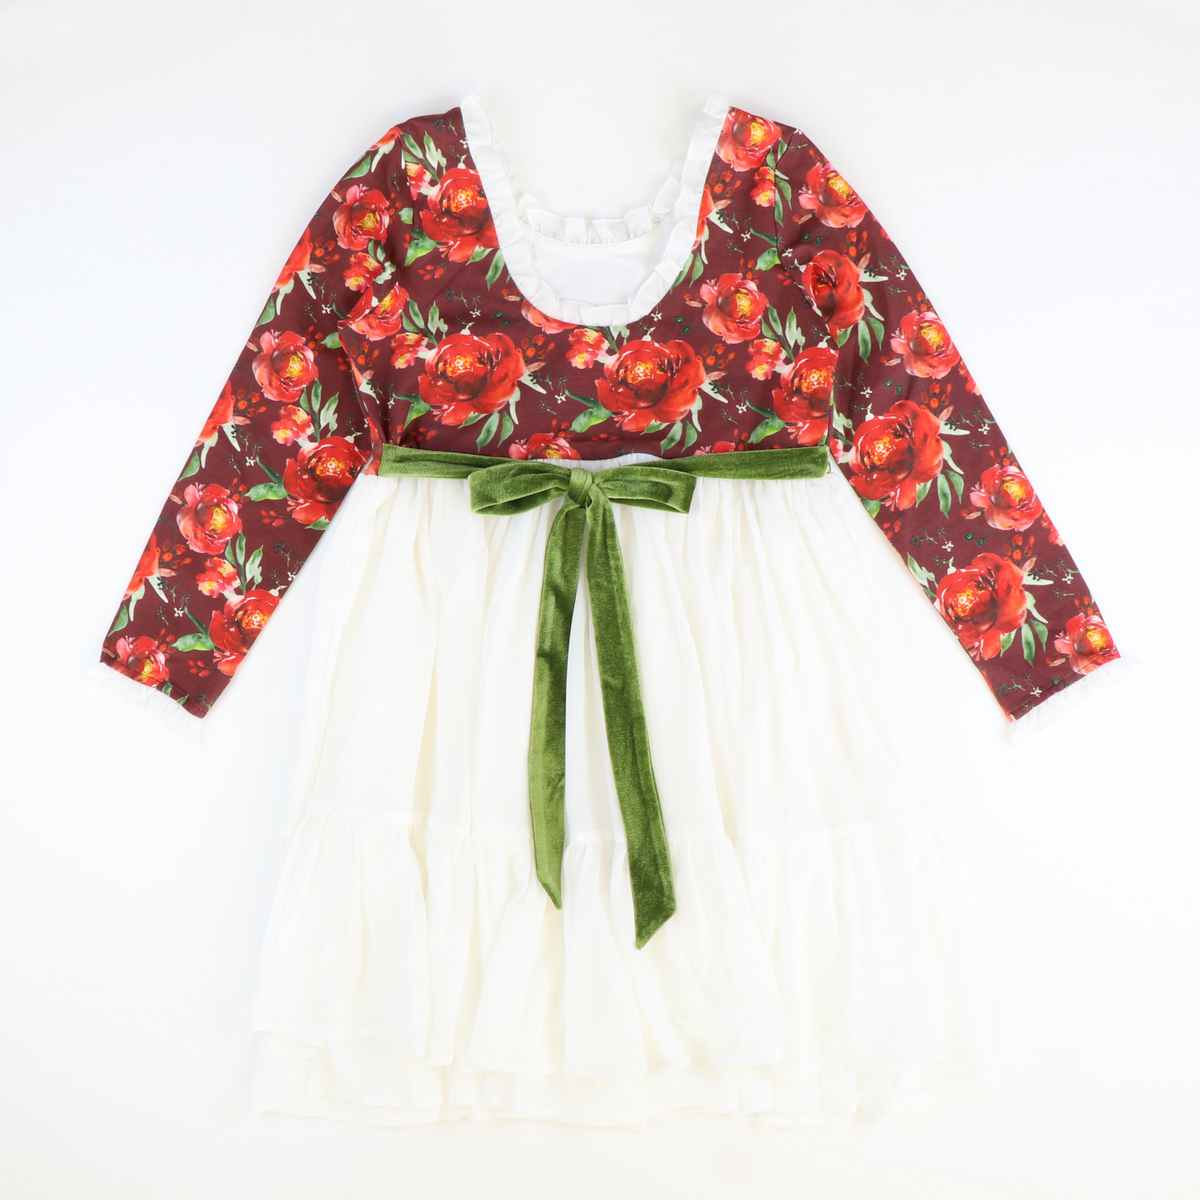 Victoria Dress - Christmas Rose - Stellybelly